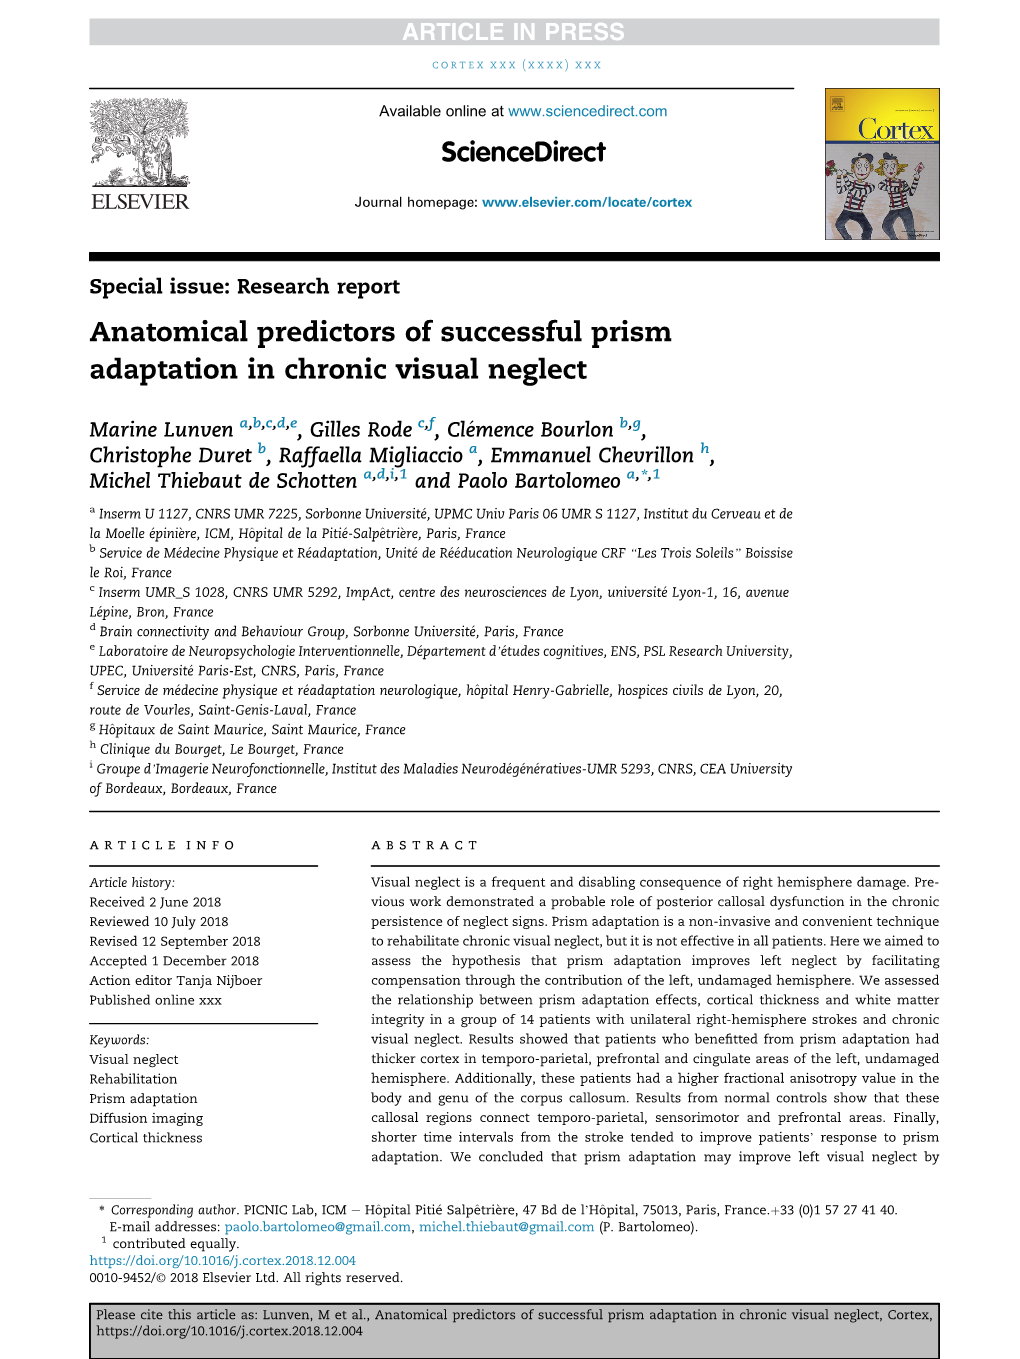 Anatomical Predictors of Successful Prism Adaptation in Chronic Visual Neglect